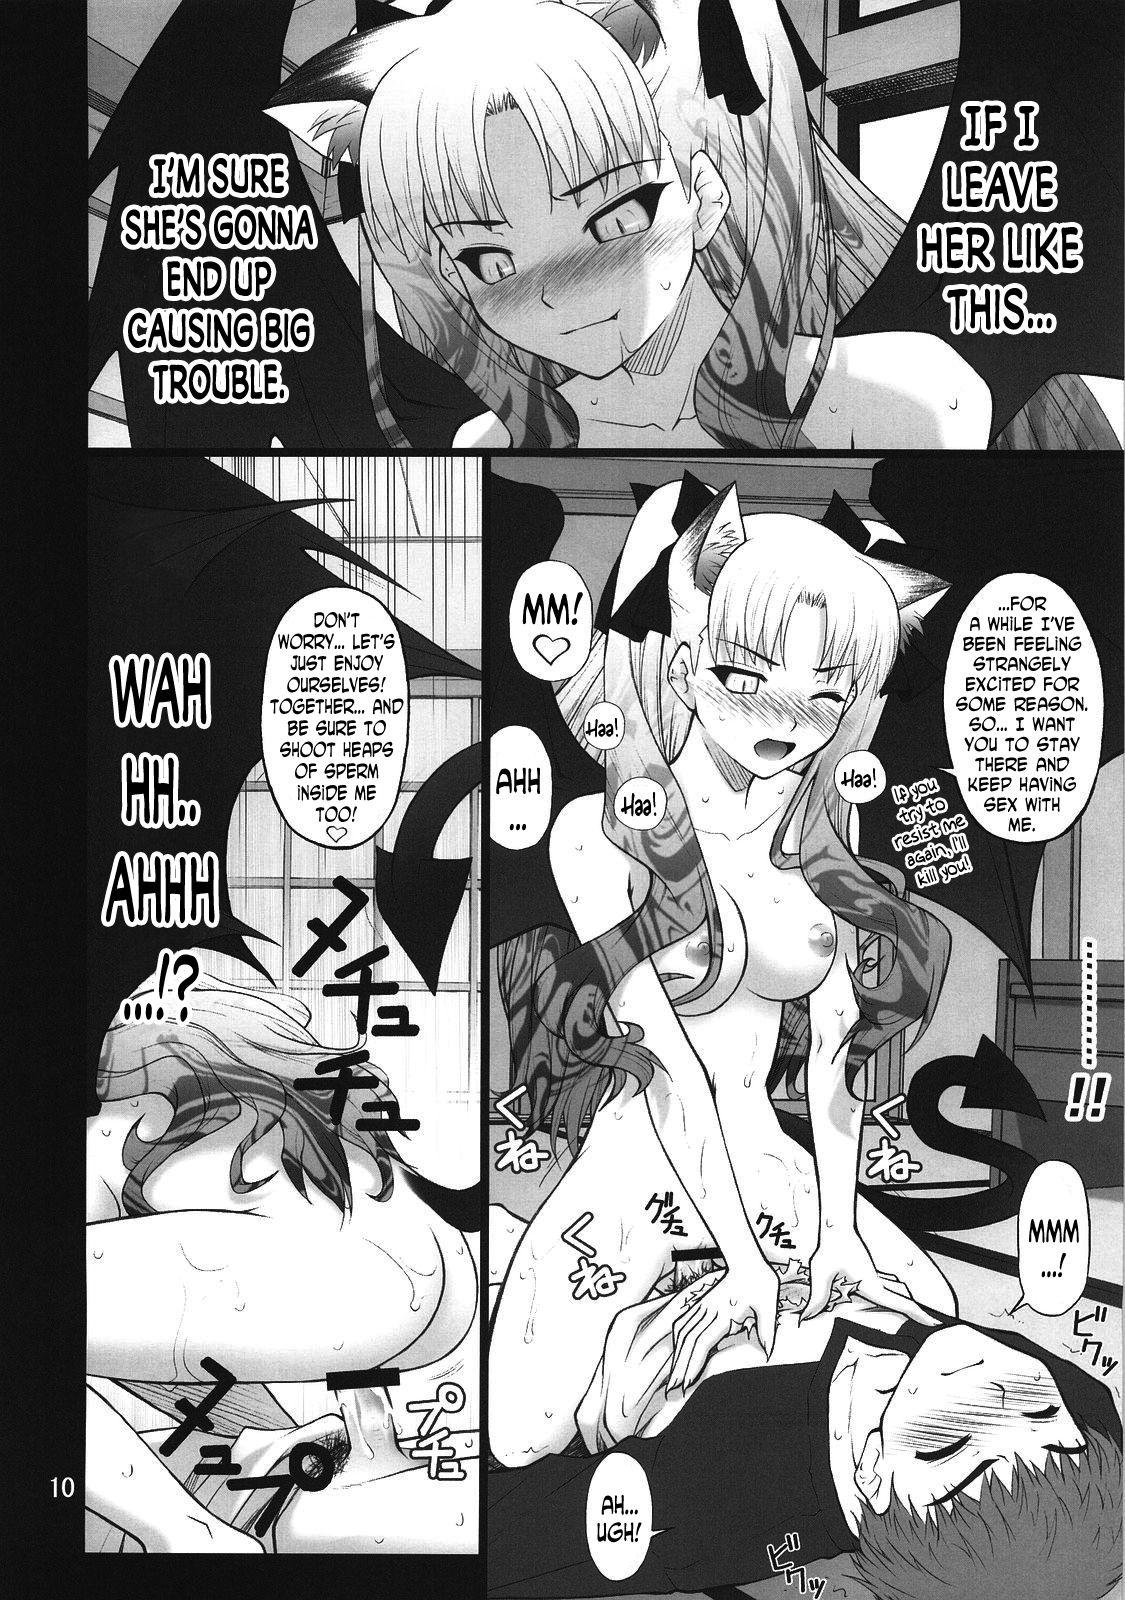 Pounded Grem-Rin 3 - Fate stay night Spread - Page 9